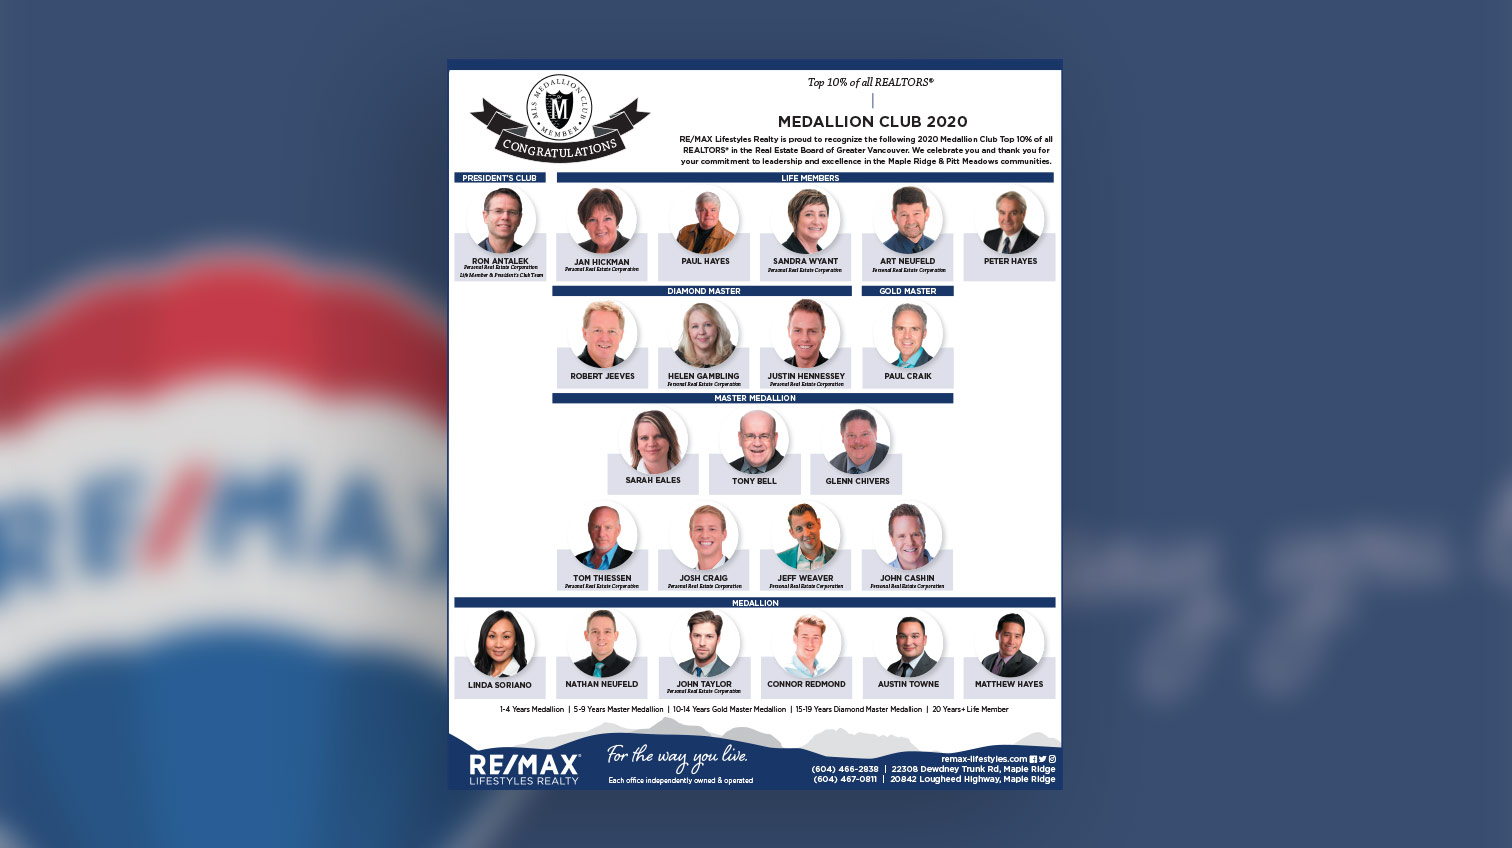 Re/max medallion club 2020 with profile pictures - White Canvas Design